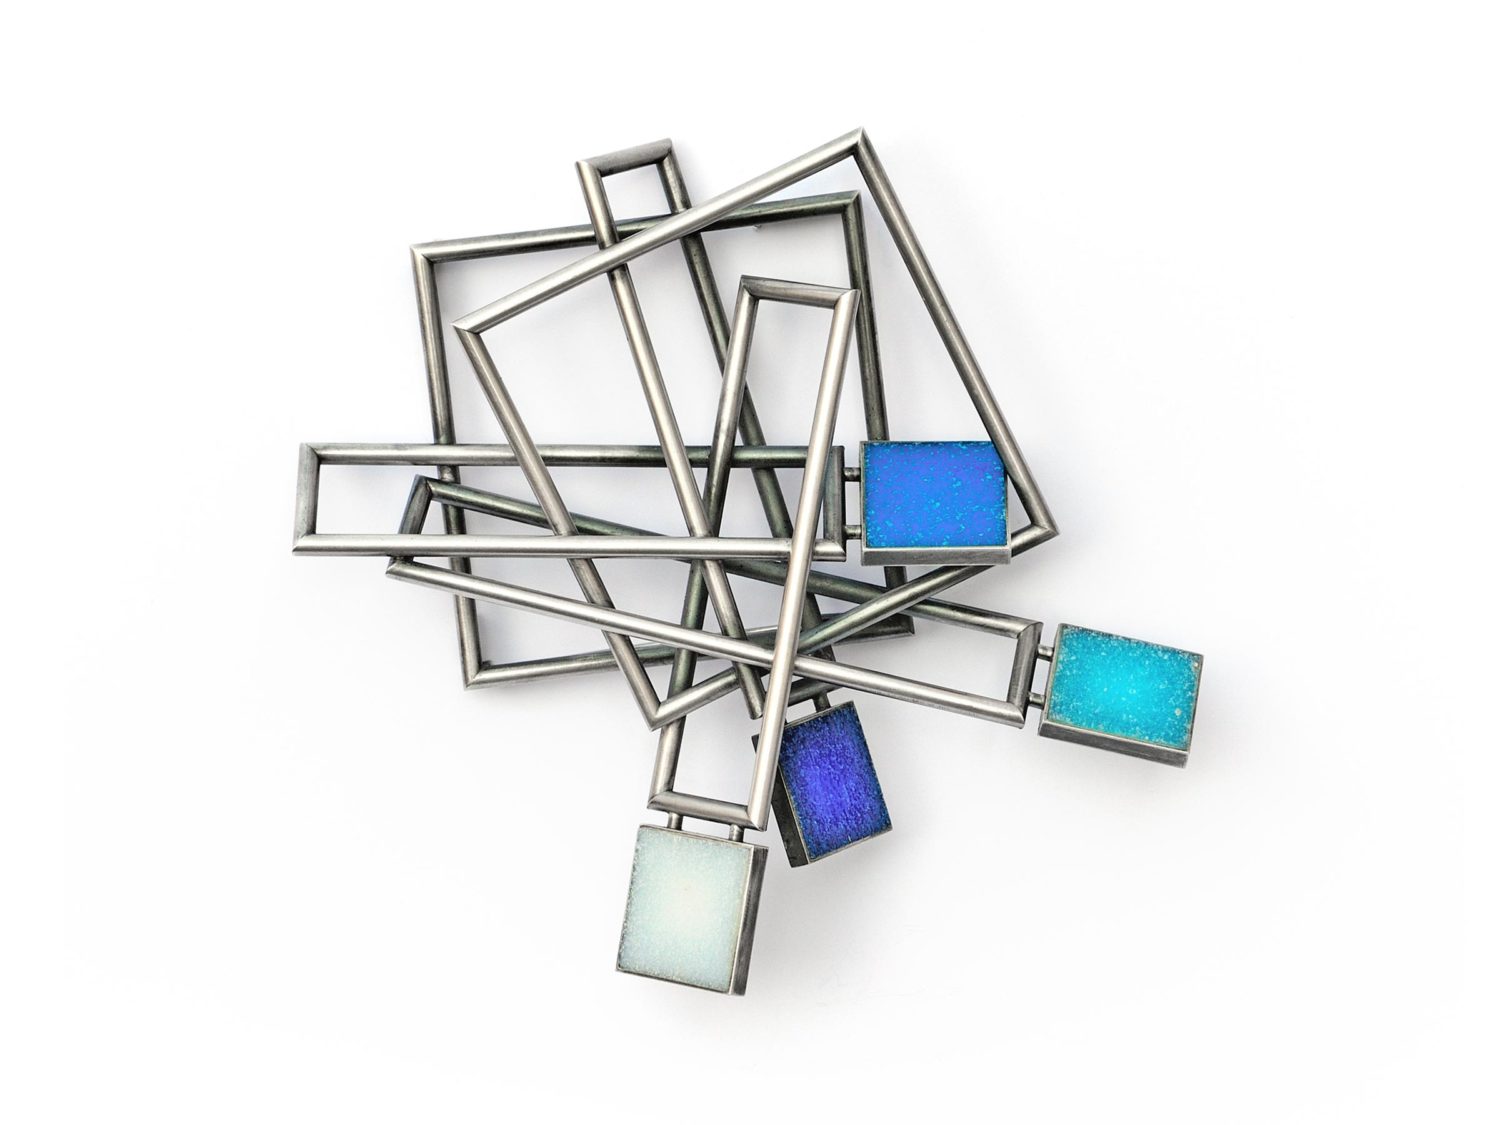 Brooch, oxidized silver, glass mosaic tiles, 2008